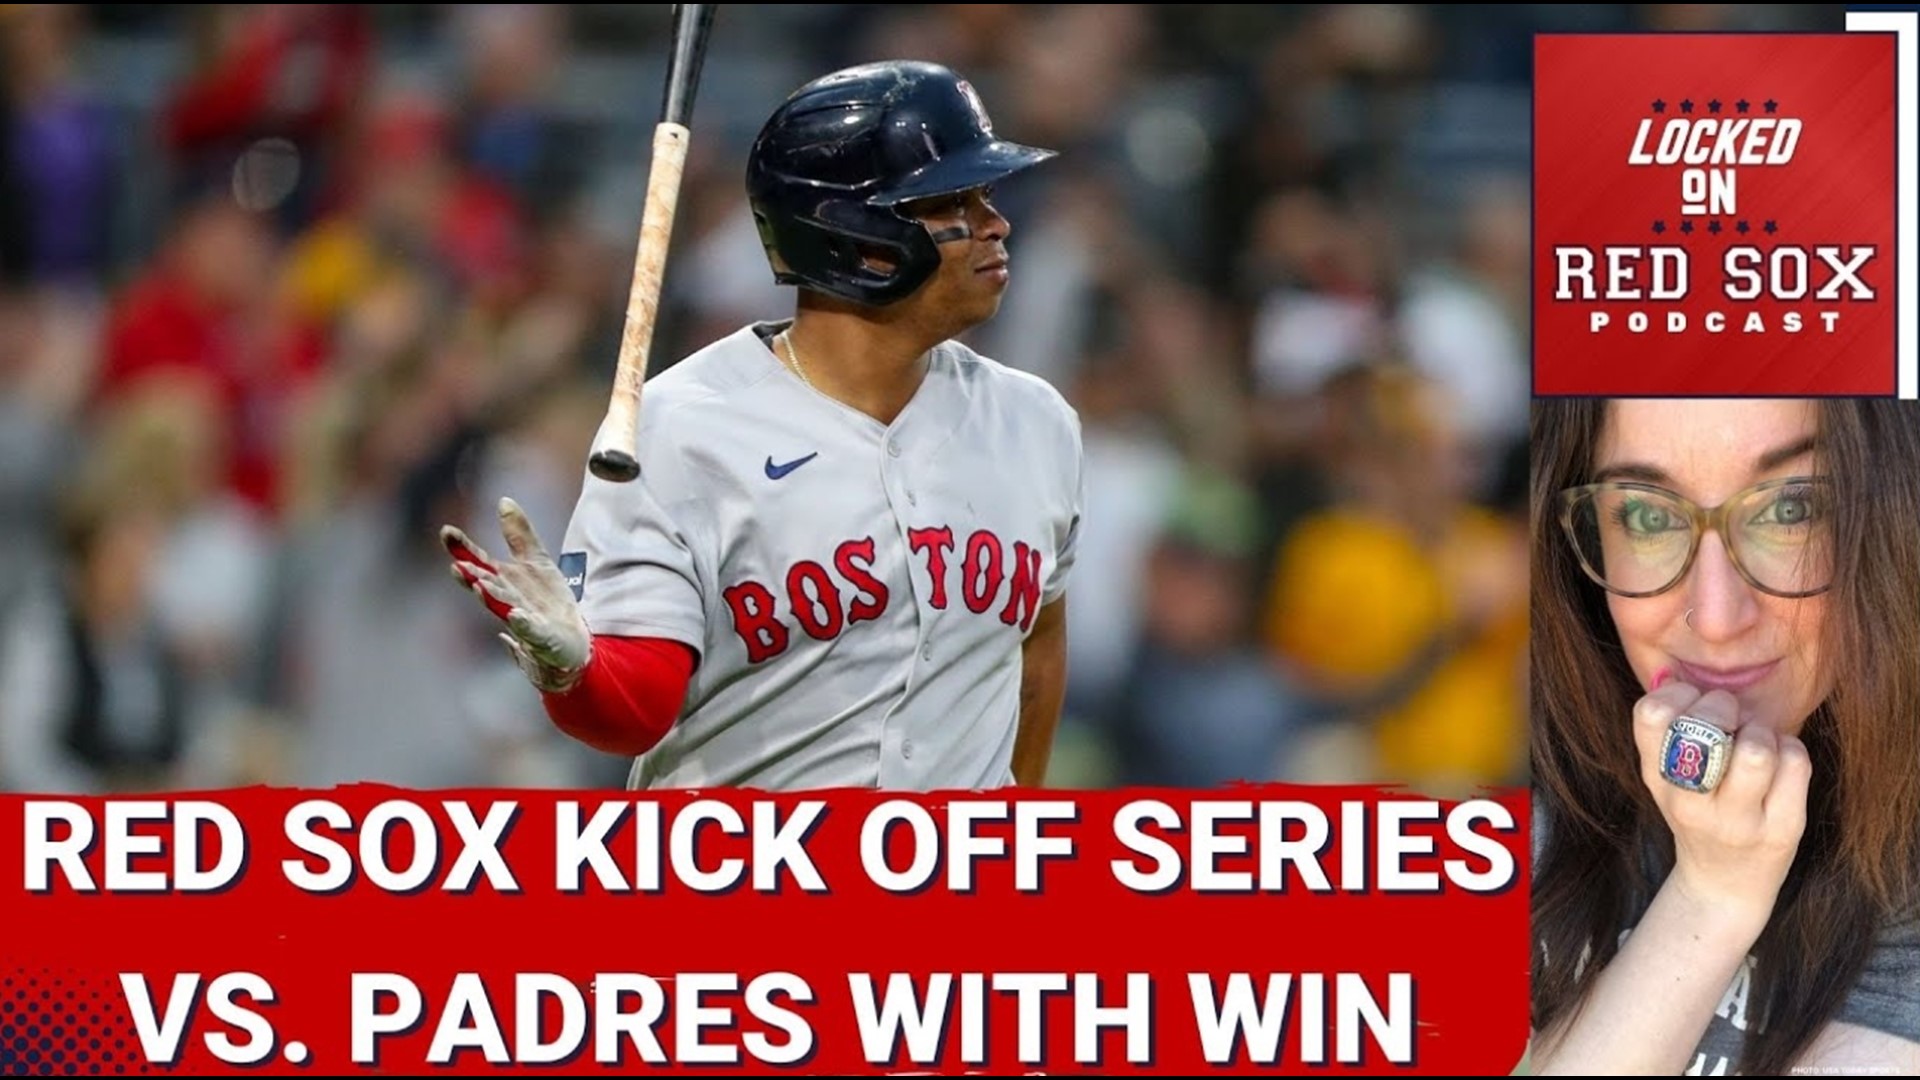 The Boston Red Sox beat the San Diego Padres 6-1 on Friday night at Petco Park to extend their win streak and kick off their nine-game road trip on a high note.